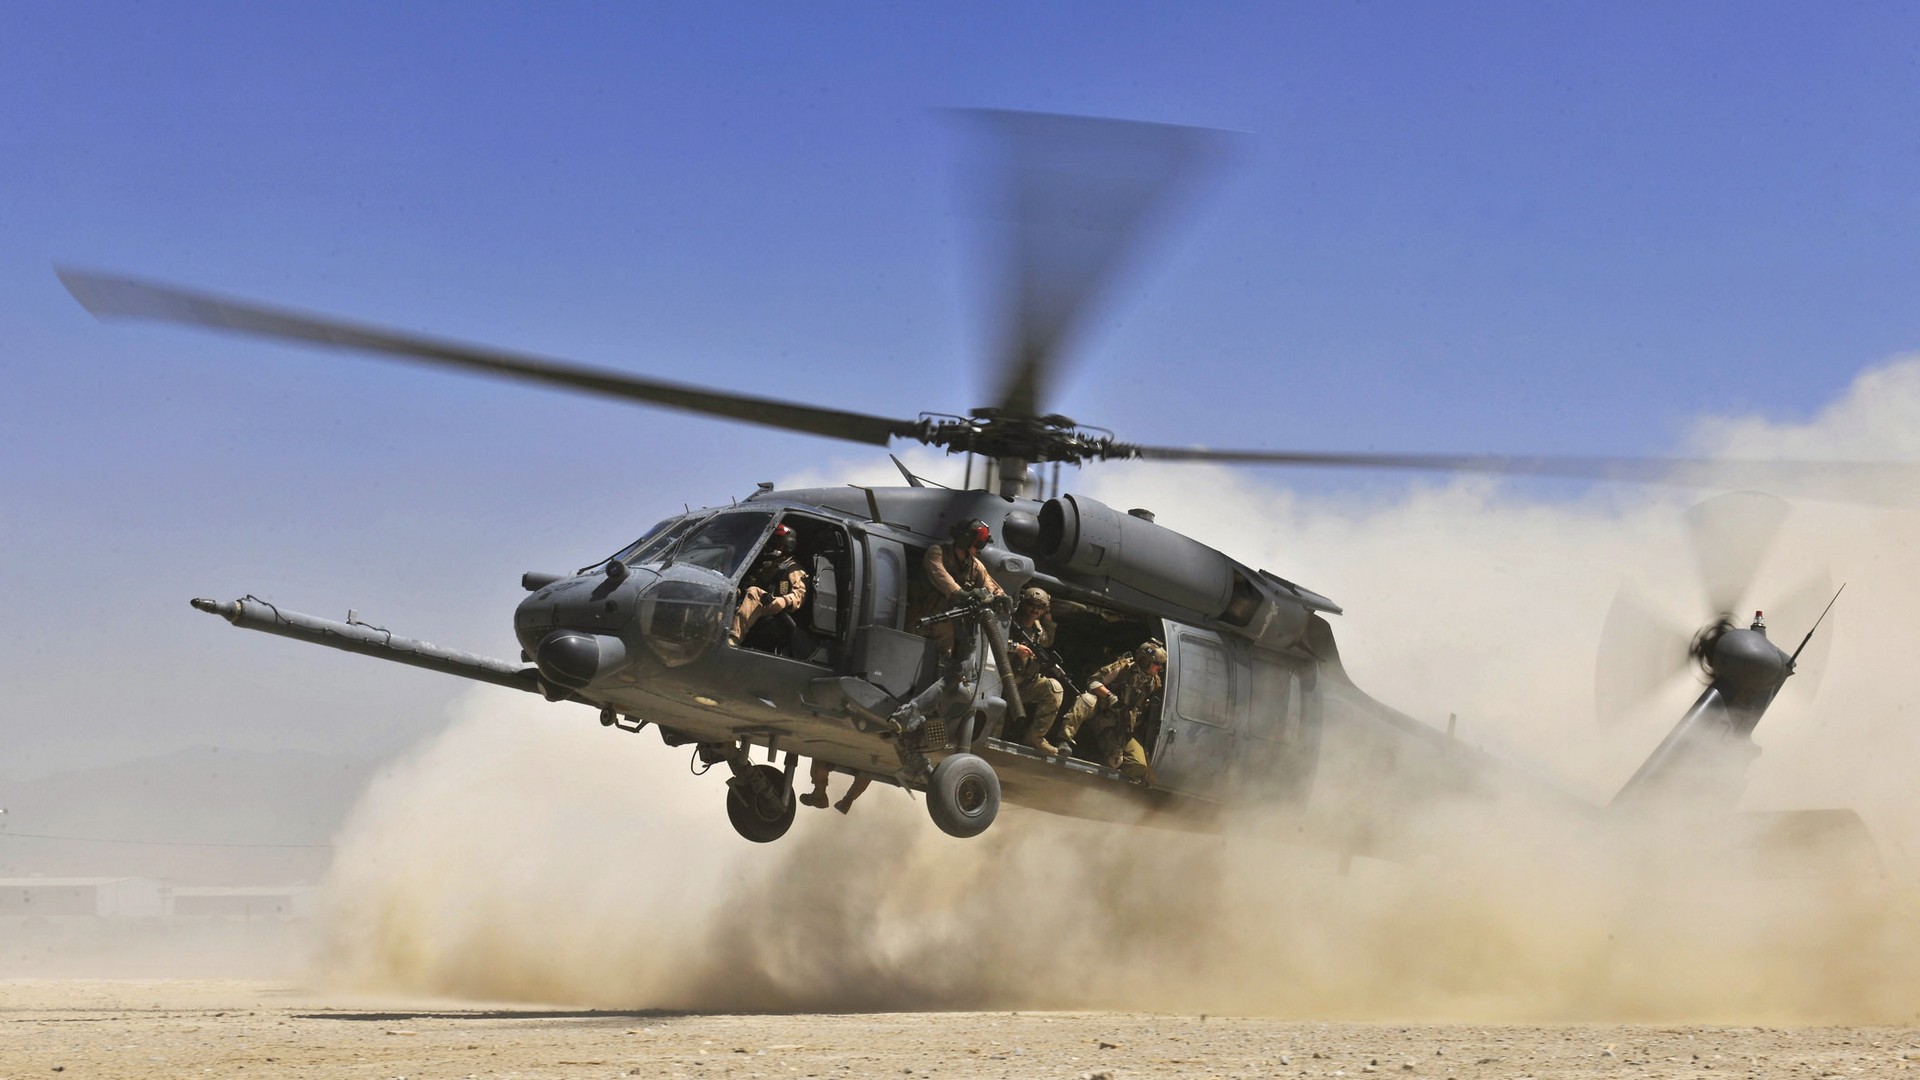 helicopters, US Air Force, HH 60G, Combat Rescue, Combat Wallpaper